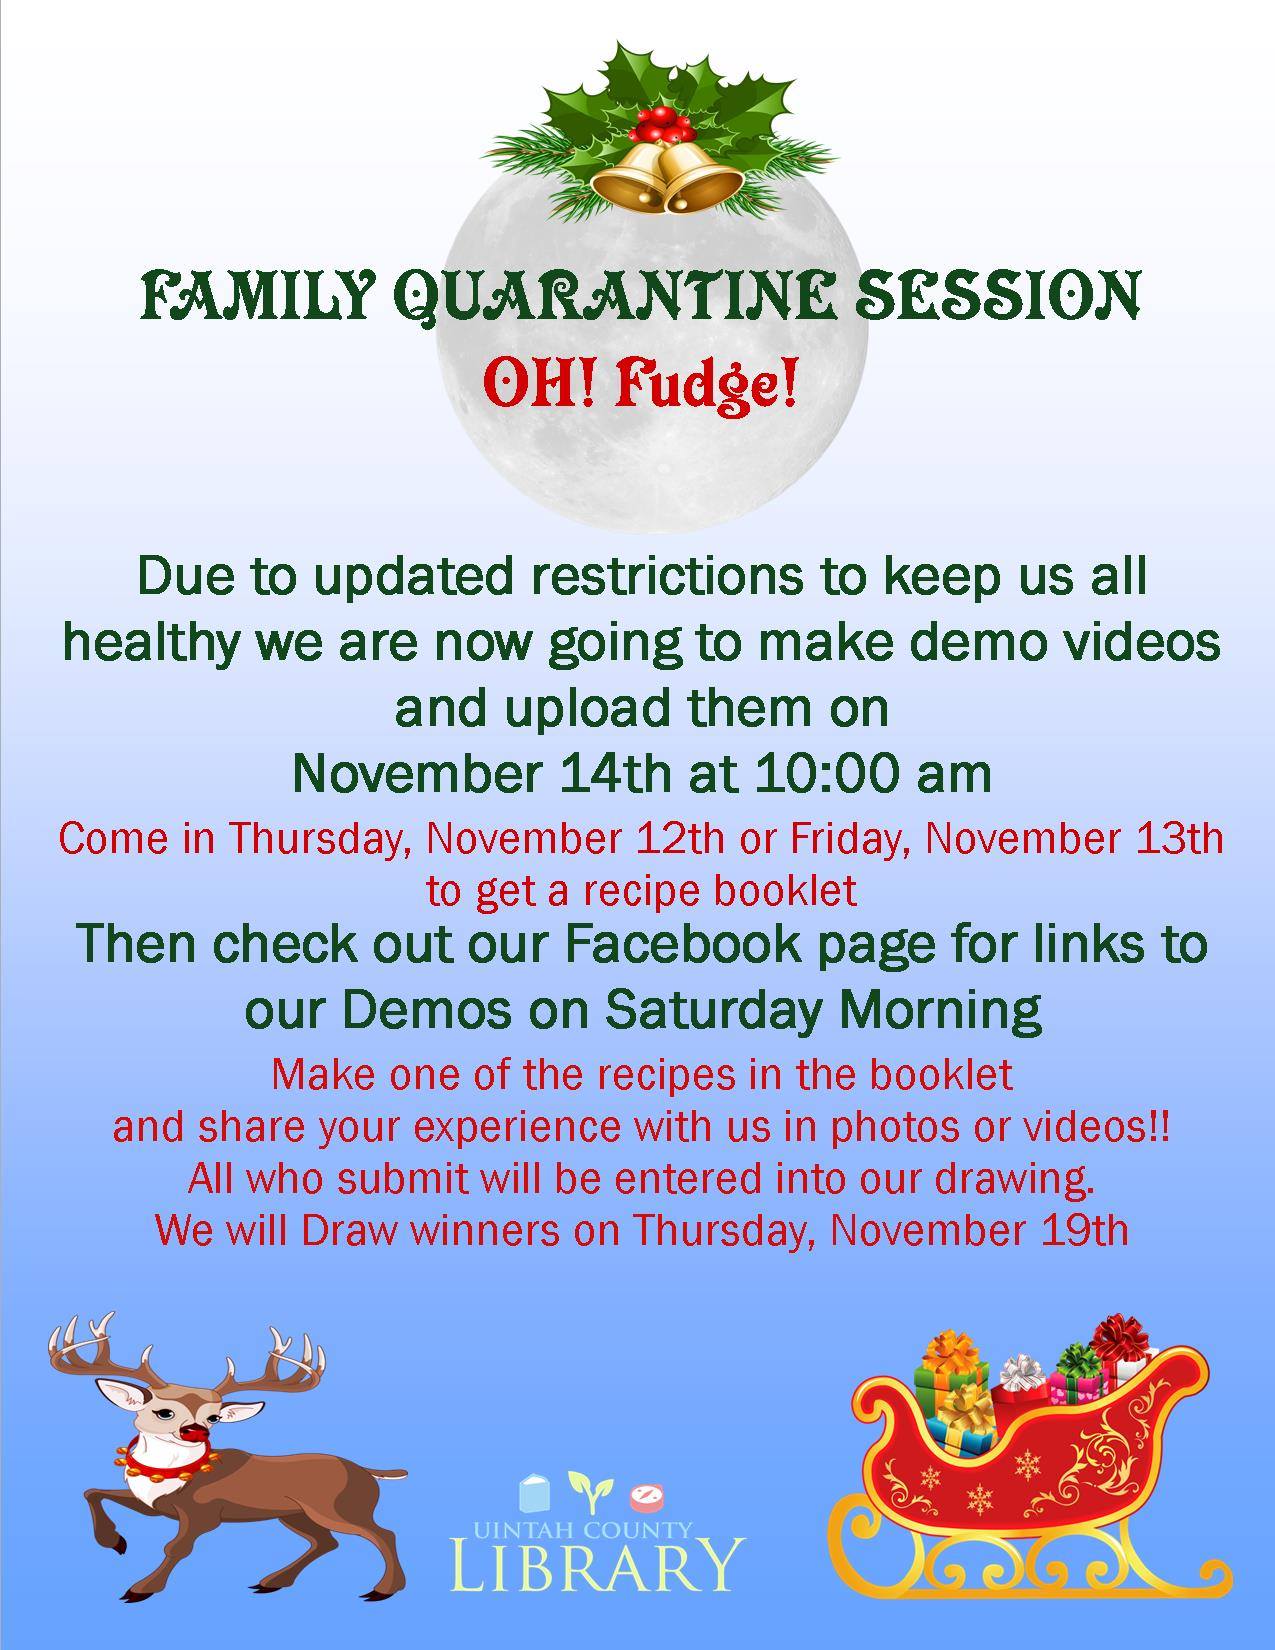 Due to updated health restrictions, we are now going to make demo videos and upload them to our Uintah County Library Facebook page on November 14th at 10:00 am. Come in on Thursday or Friday before the event to get a recipe booklet, then check out our Facebook page for links to our demos on Saturday morning.  Make one of the recipes in the booklet and share your experience with us in photos or videos! All who submit a video or photos will be entered into our Oh Fudge! Drawing. Winners drawn on the 19th.